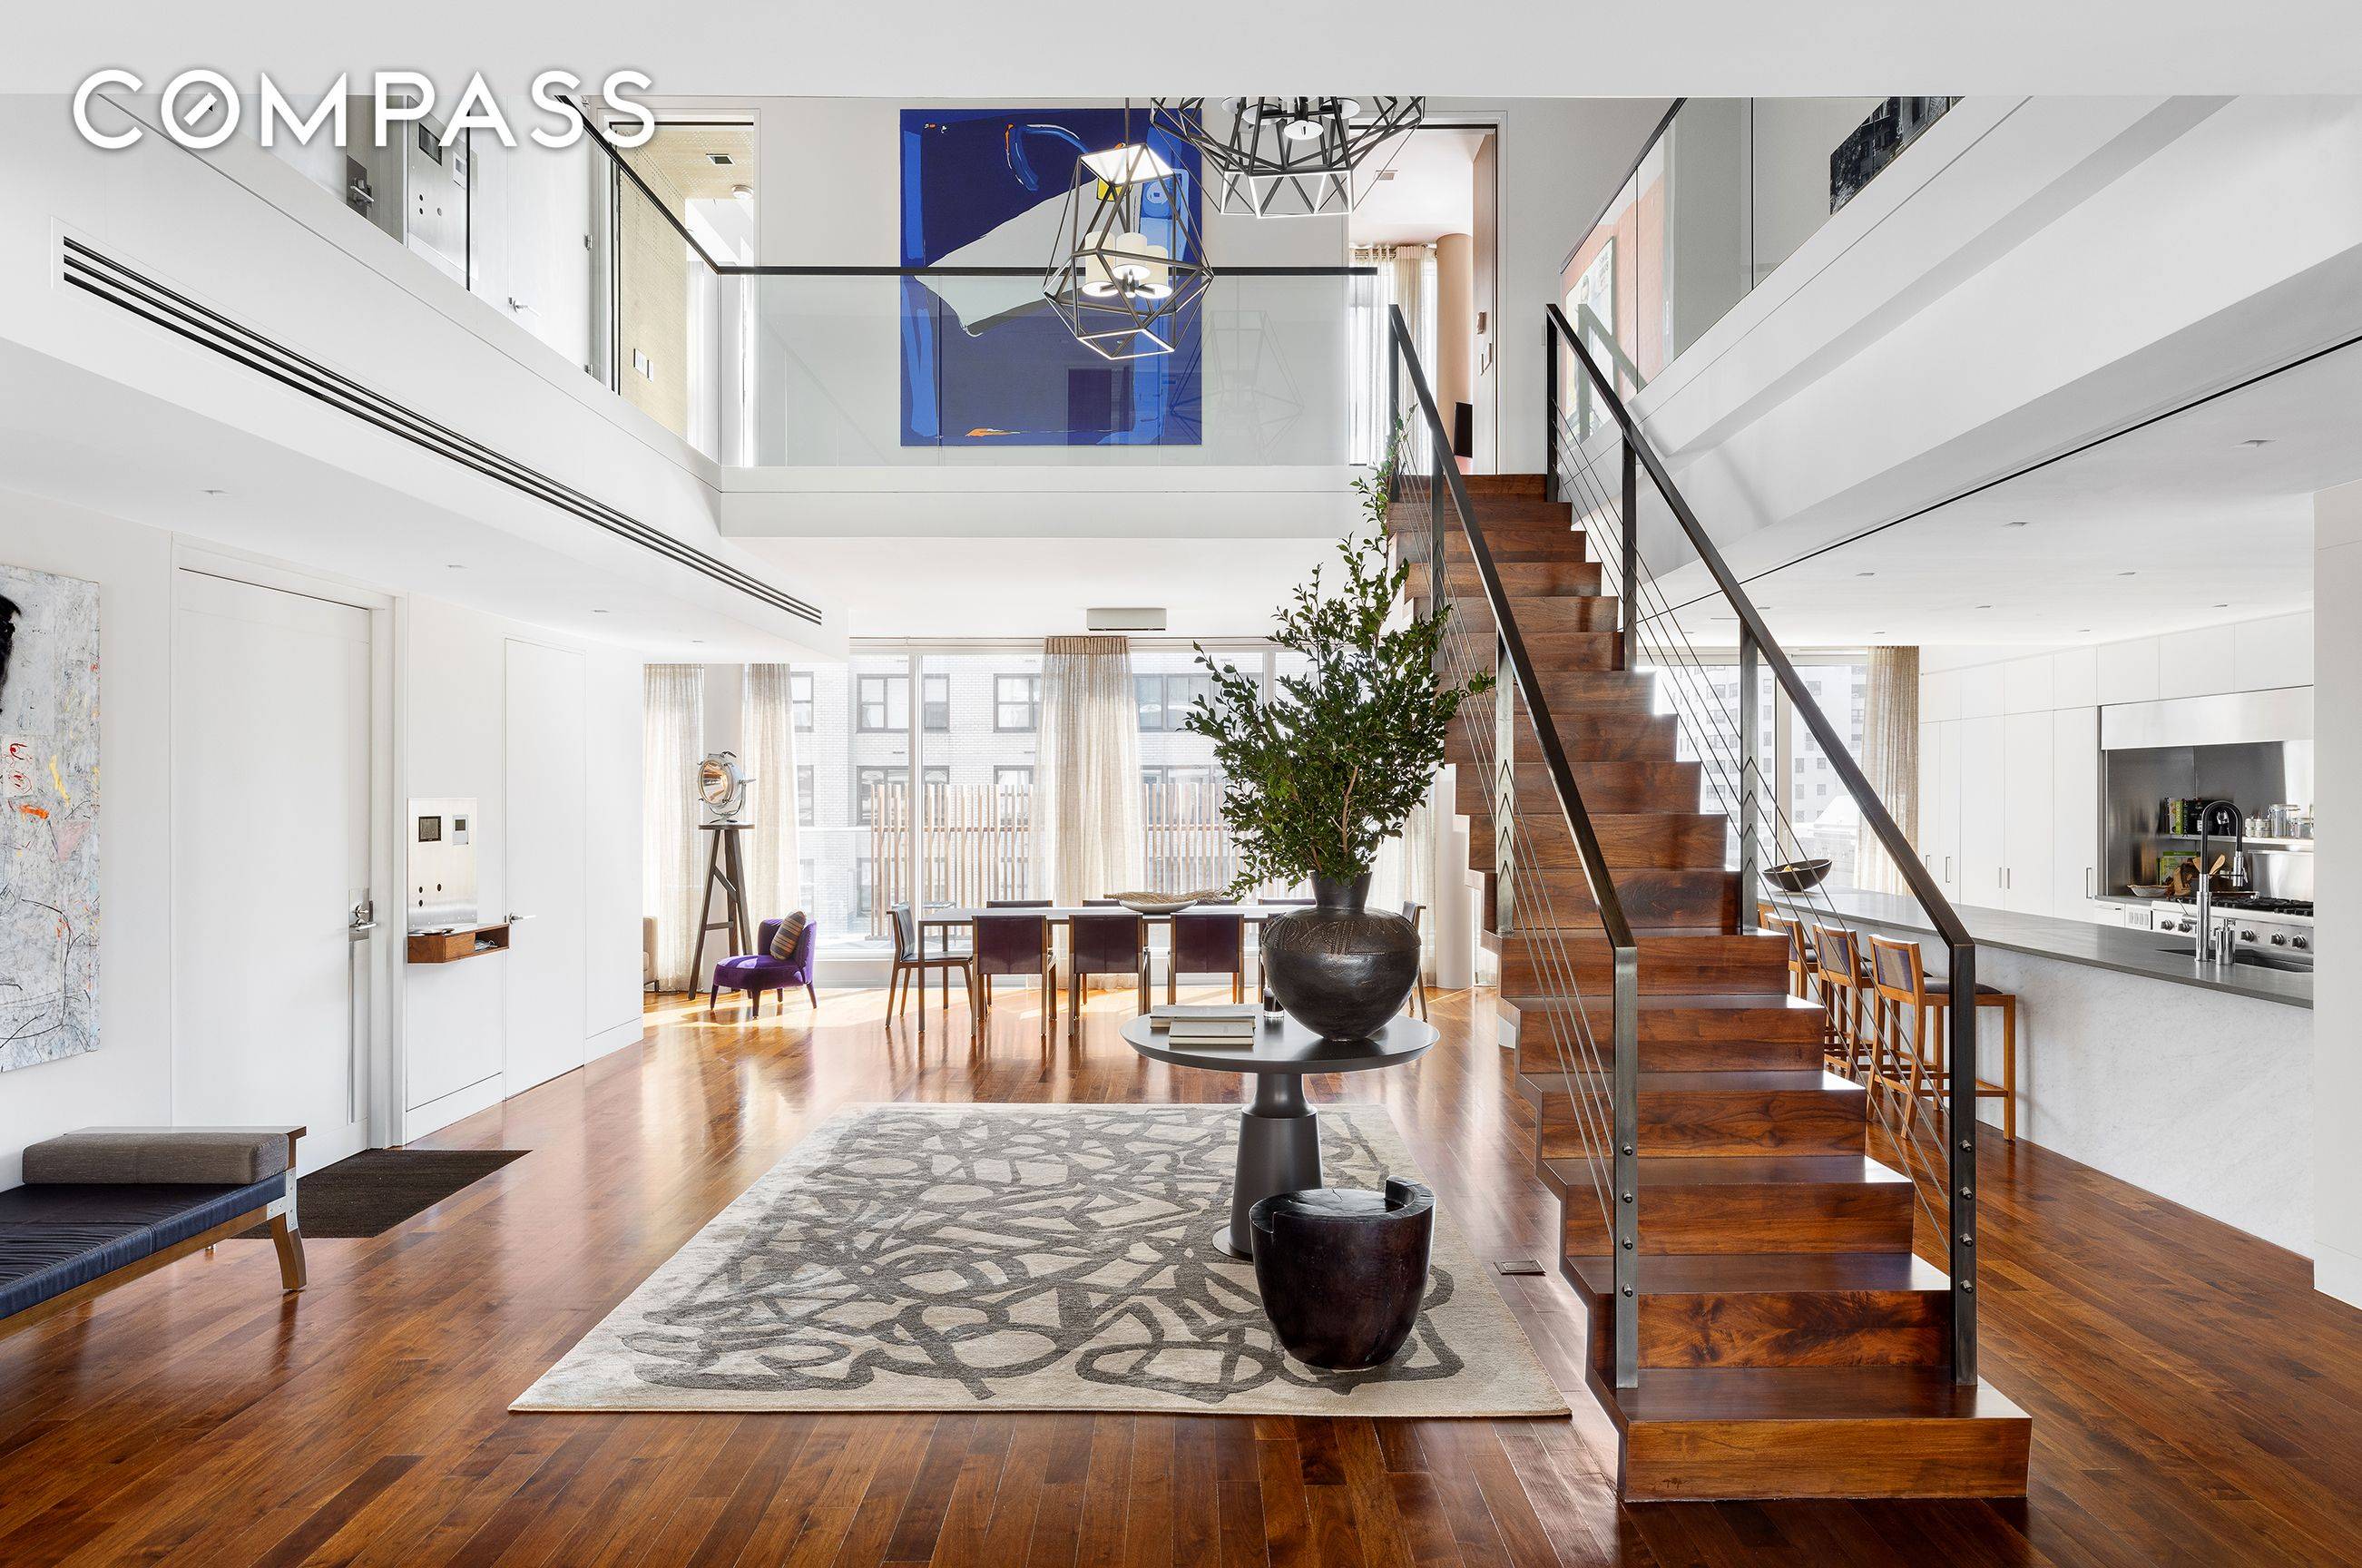 Exceedingly rare to find in this coveted Gramercy location, this sprawling five bedroom, five and a half bath duplex penthouse is filled with light all day and is offered fully ...